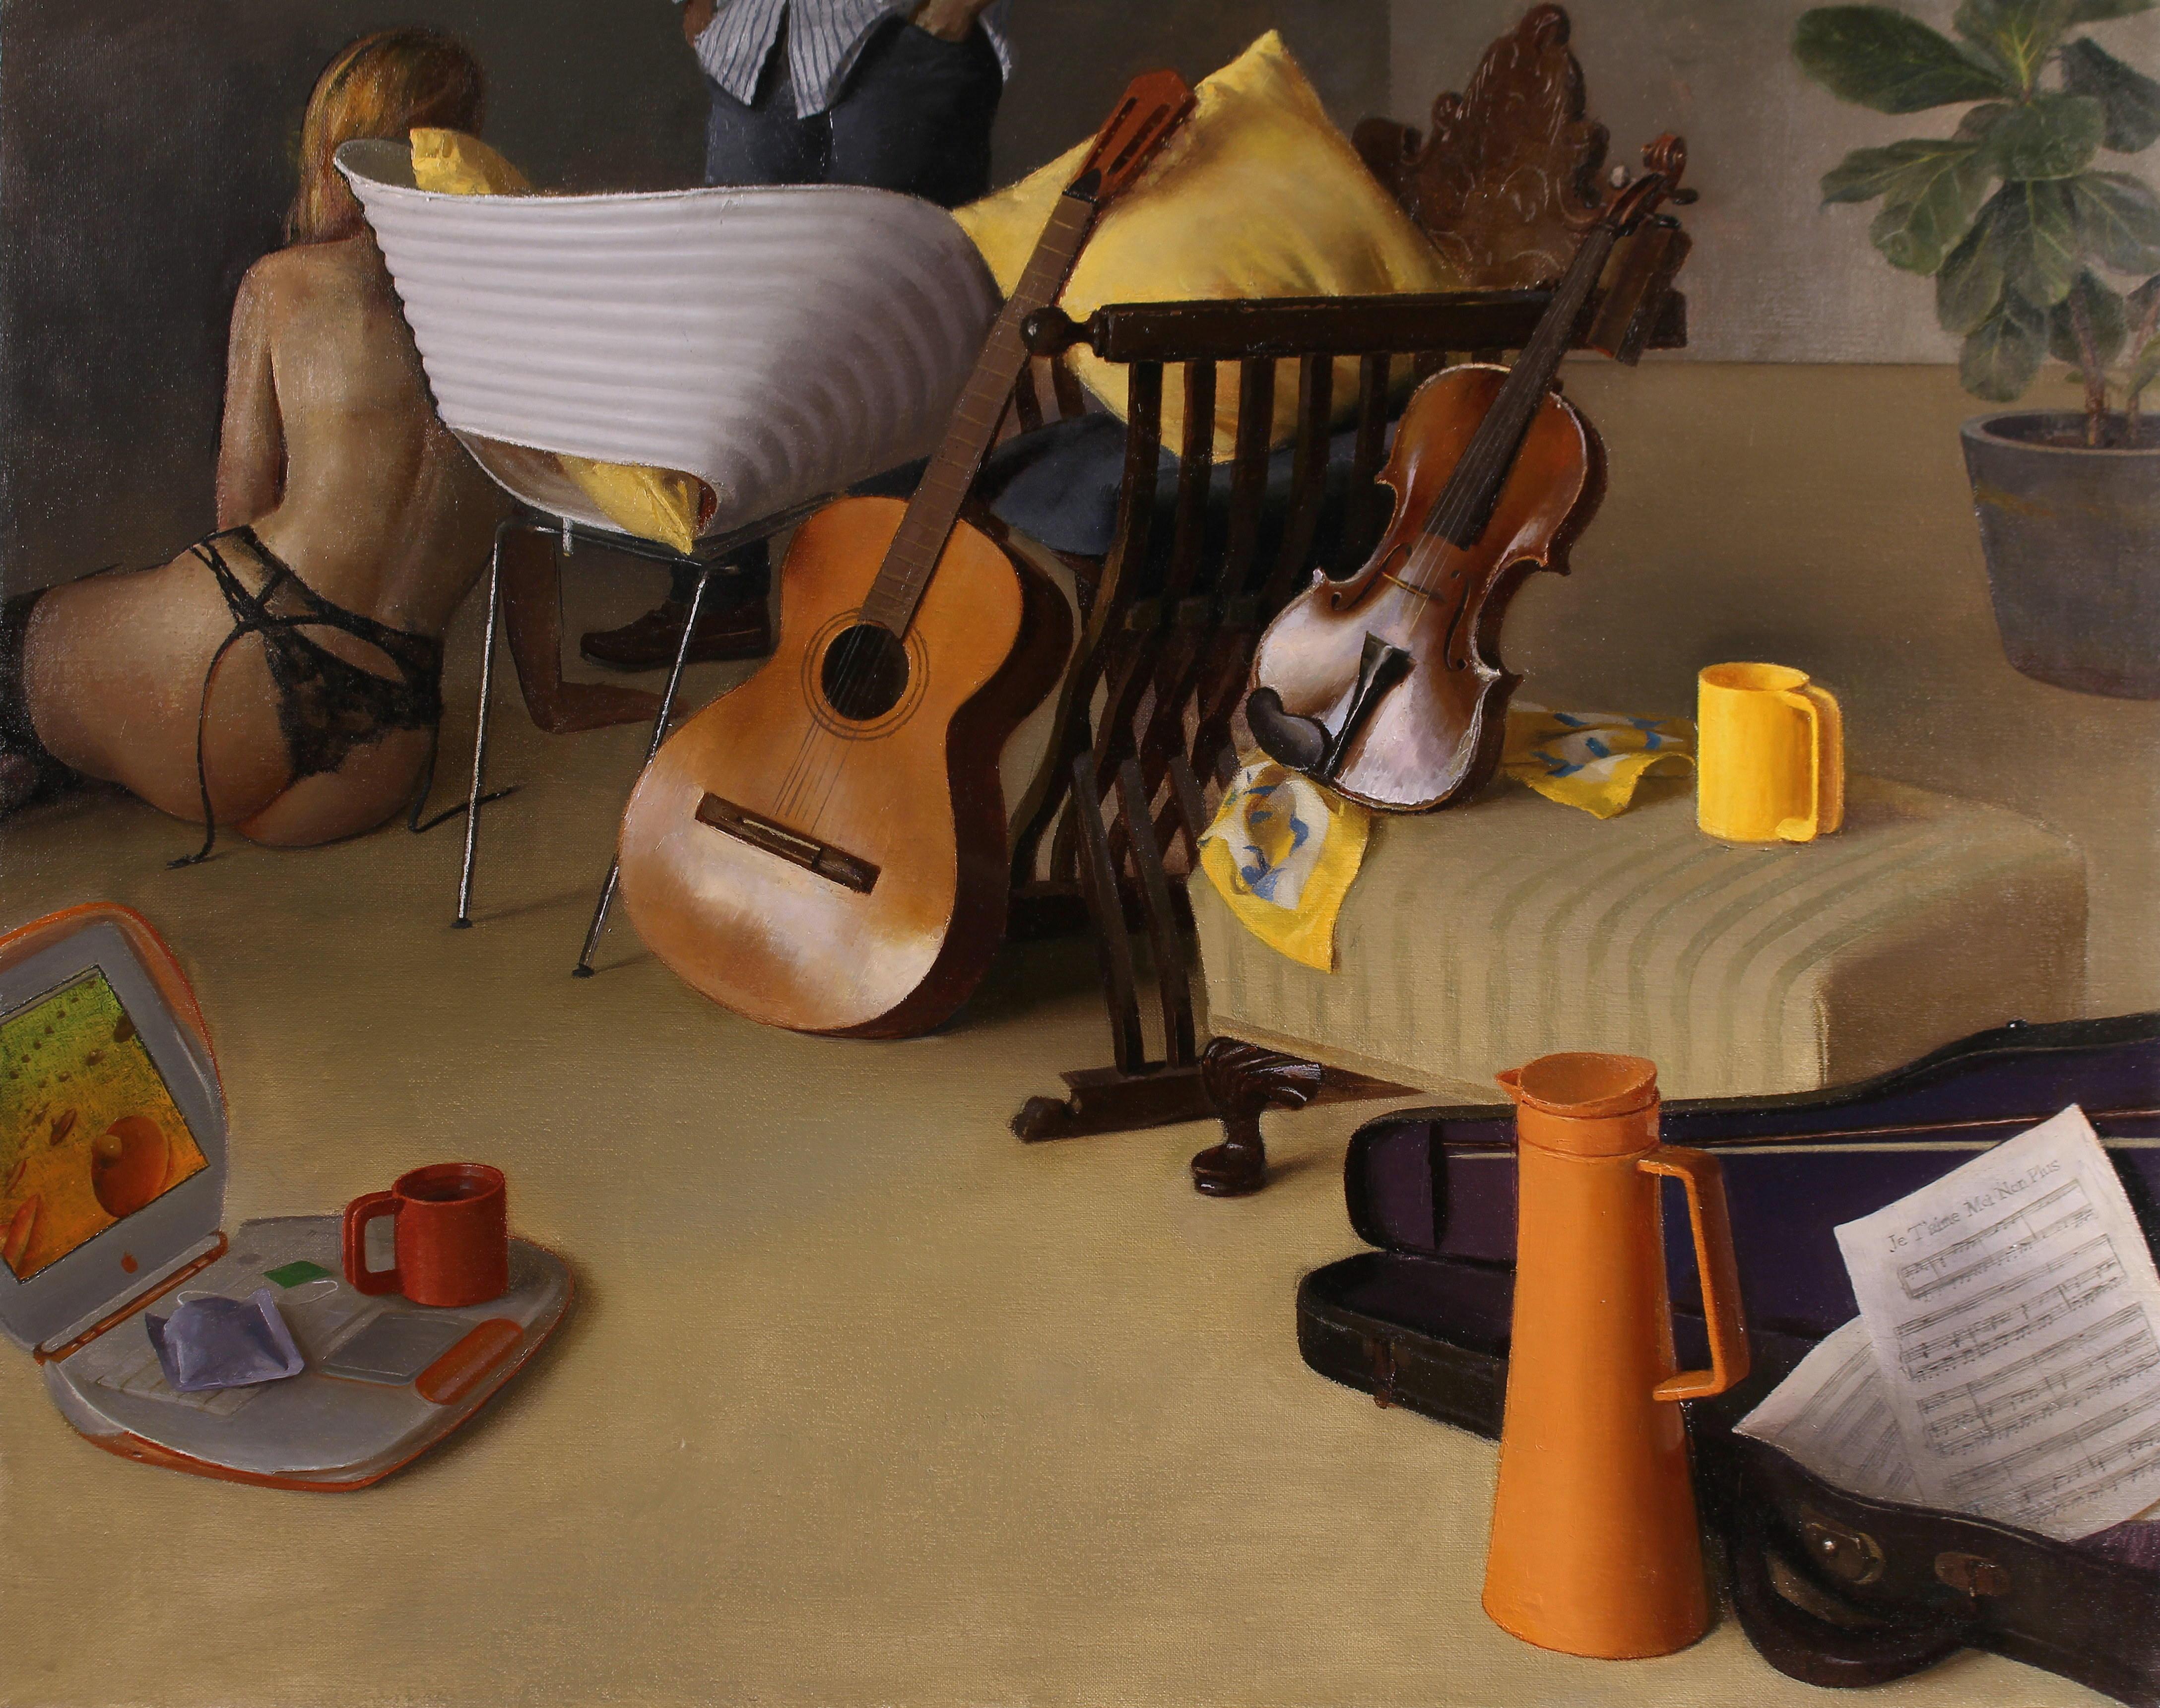 Duet I - Still Life with Guitar, Violin and Scantily Clad Woman, Oil on Linen